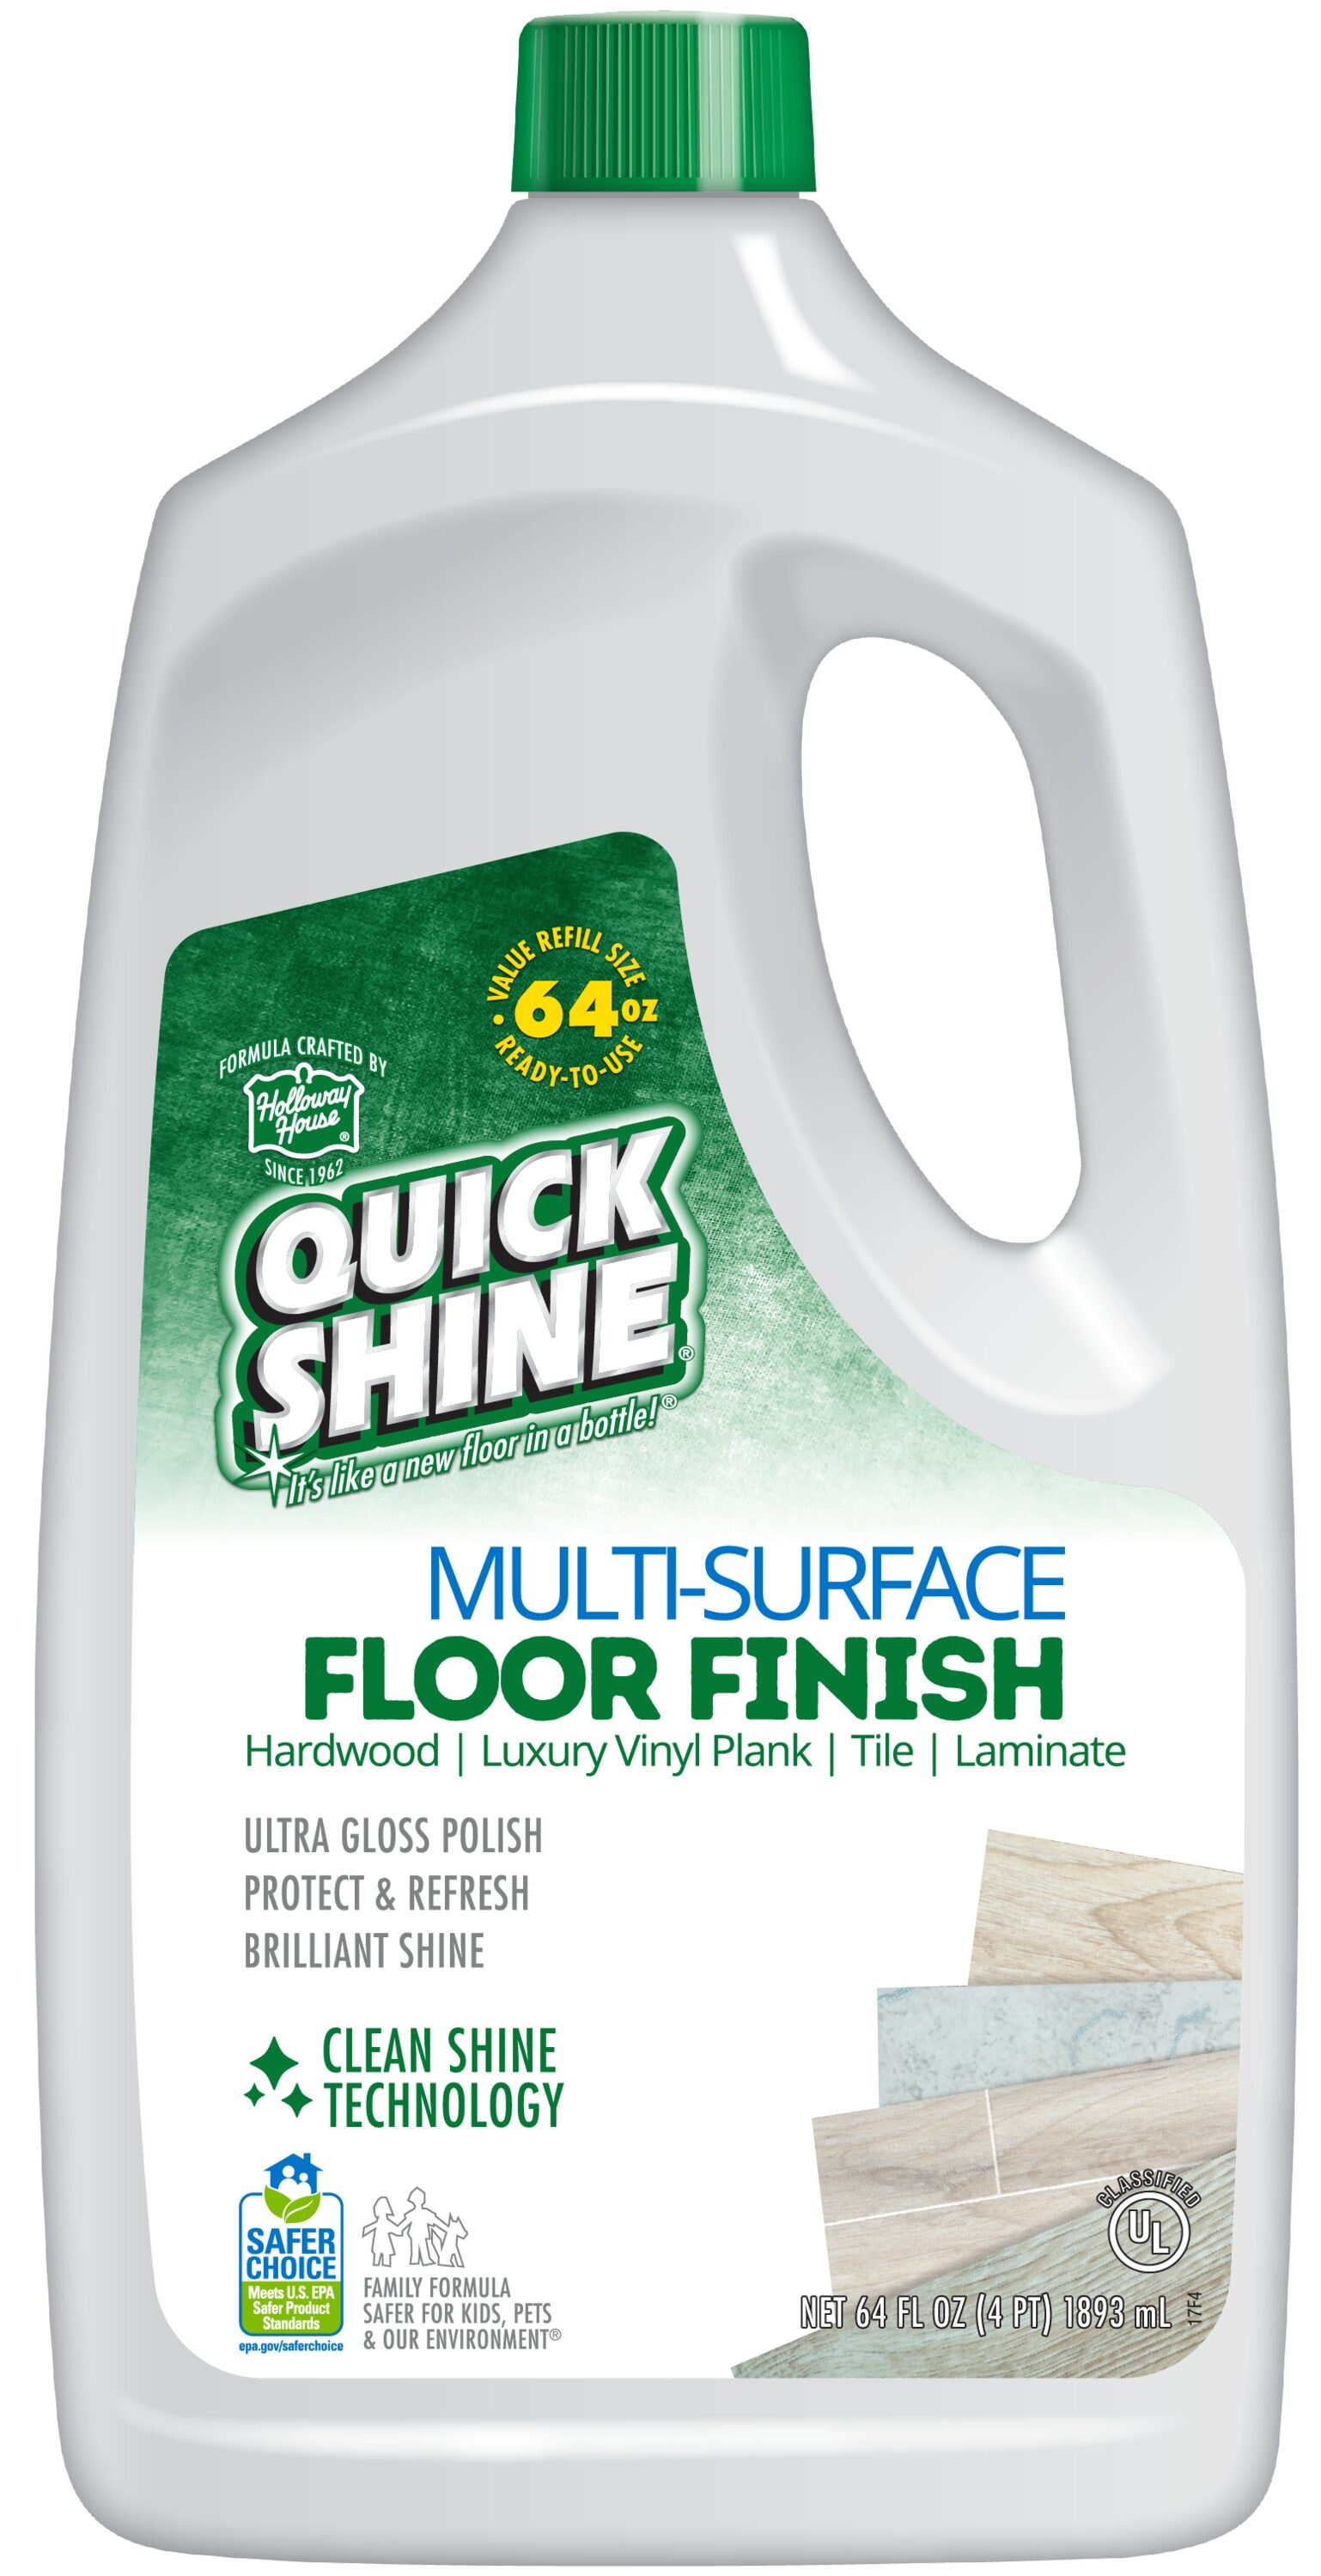 Quick Shine 3-in-1 Max ShinePower Surface Cleaner 24oz, 6pk | Instantly Cleans & Shines w/Clean Shine Technology | Use on Countertops, Stainless